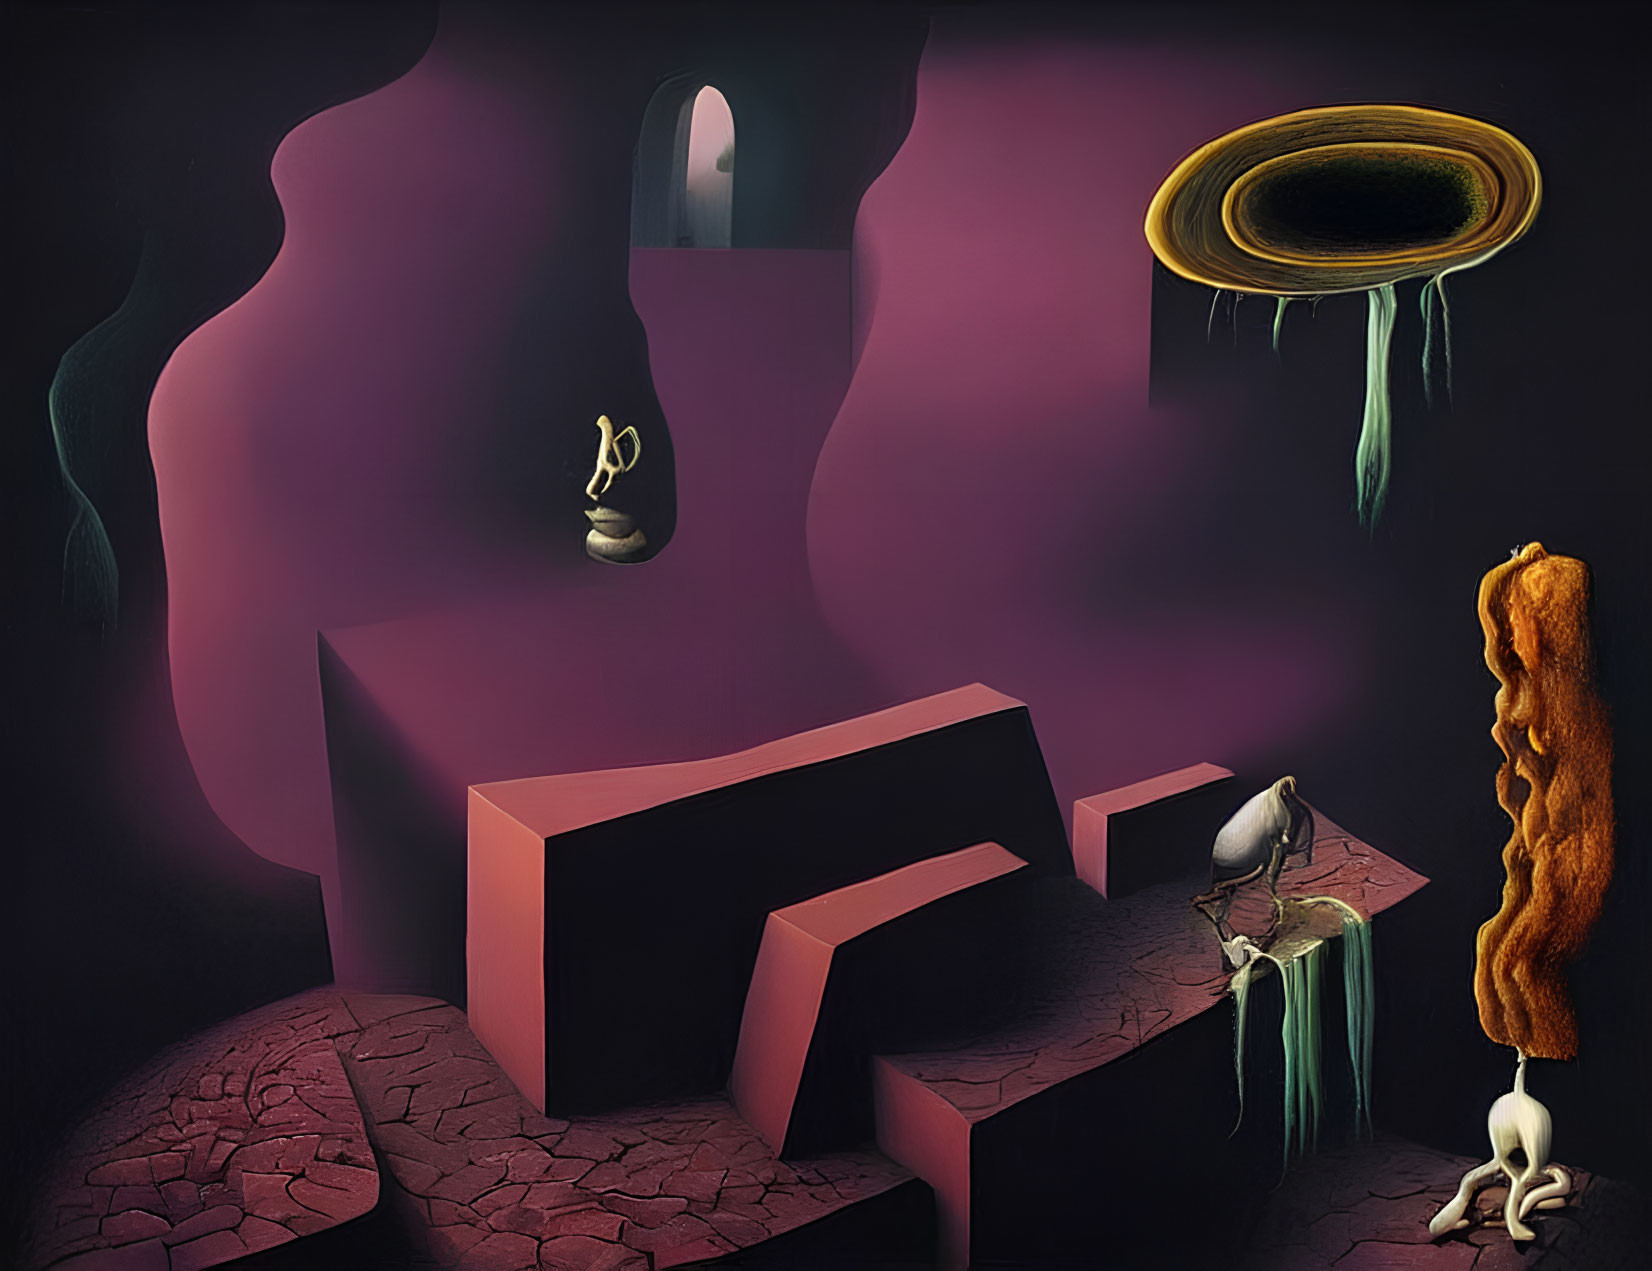 Surrealistic artwork featuring stair-like structures, floating halo, melting candle, and distant door on